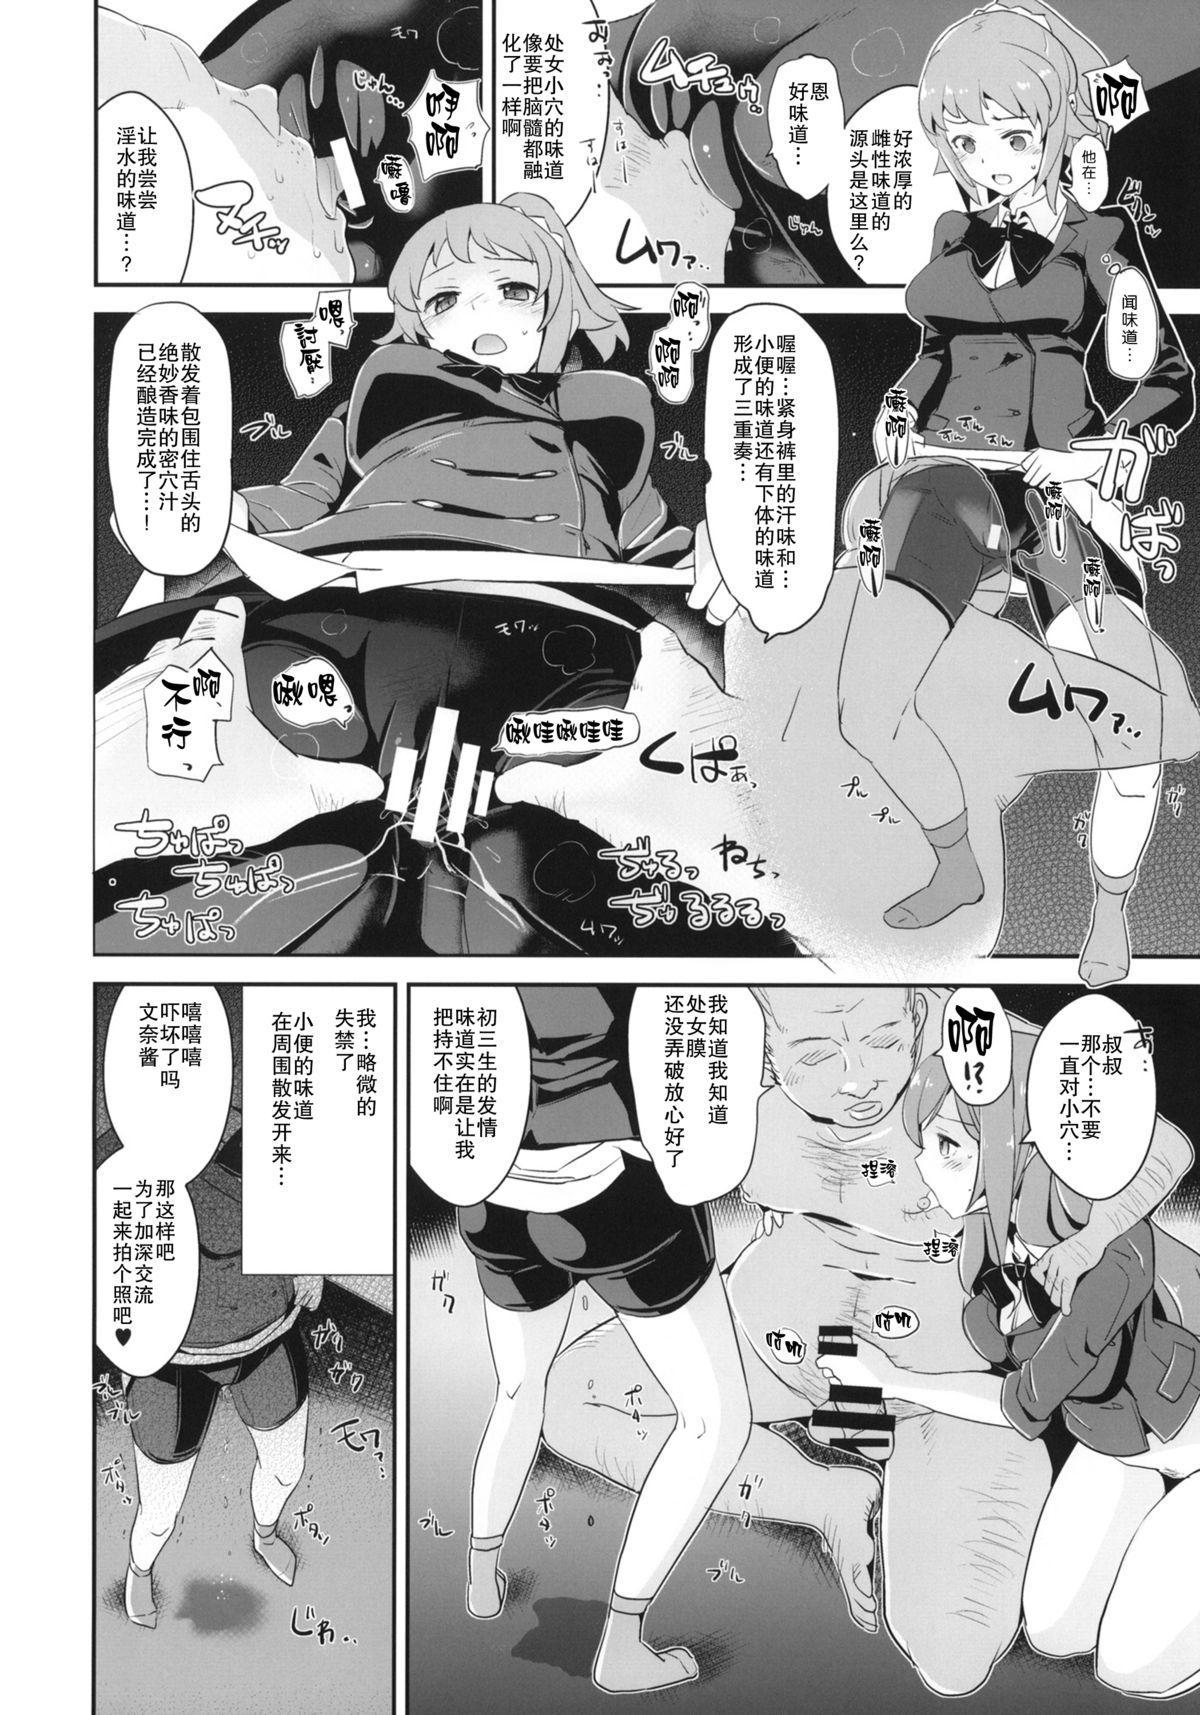 Room Omanko Damedesu. - Gundam build fighters try Hot Naked Girl - Page 5